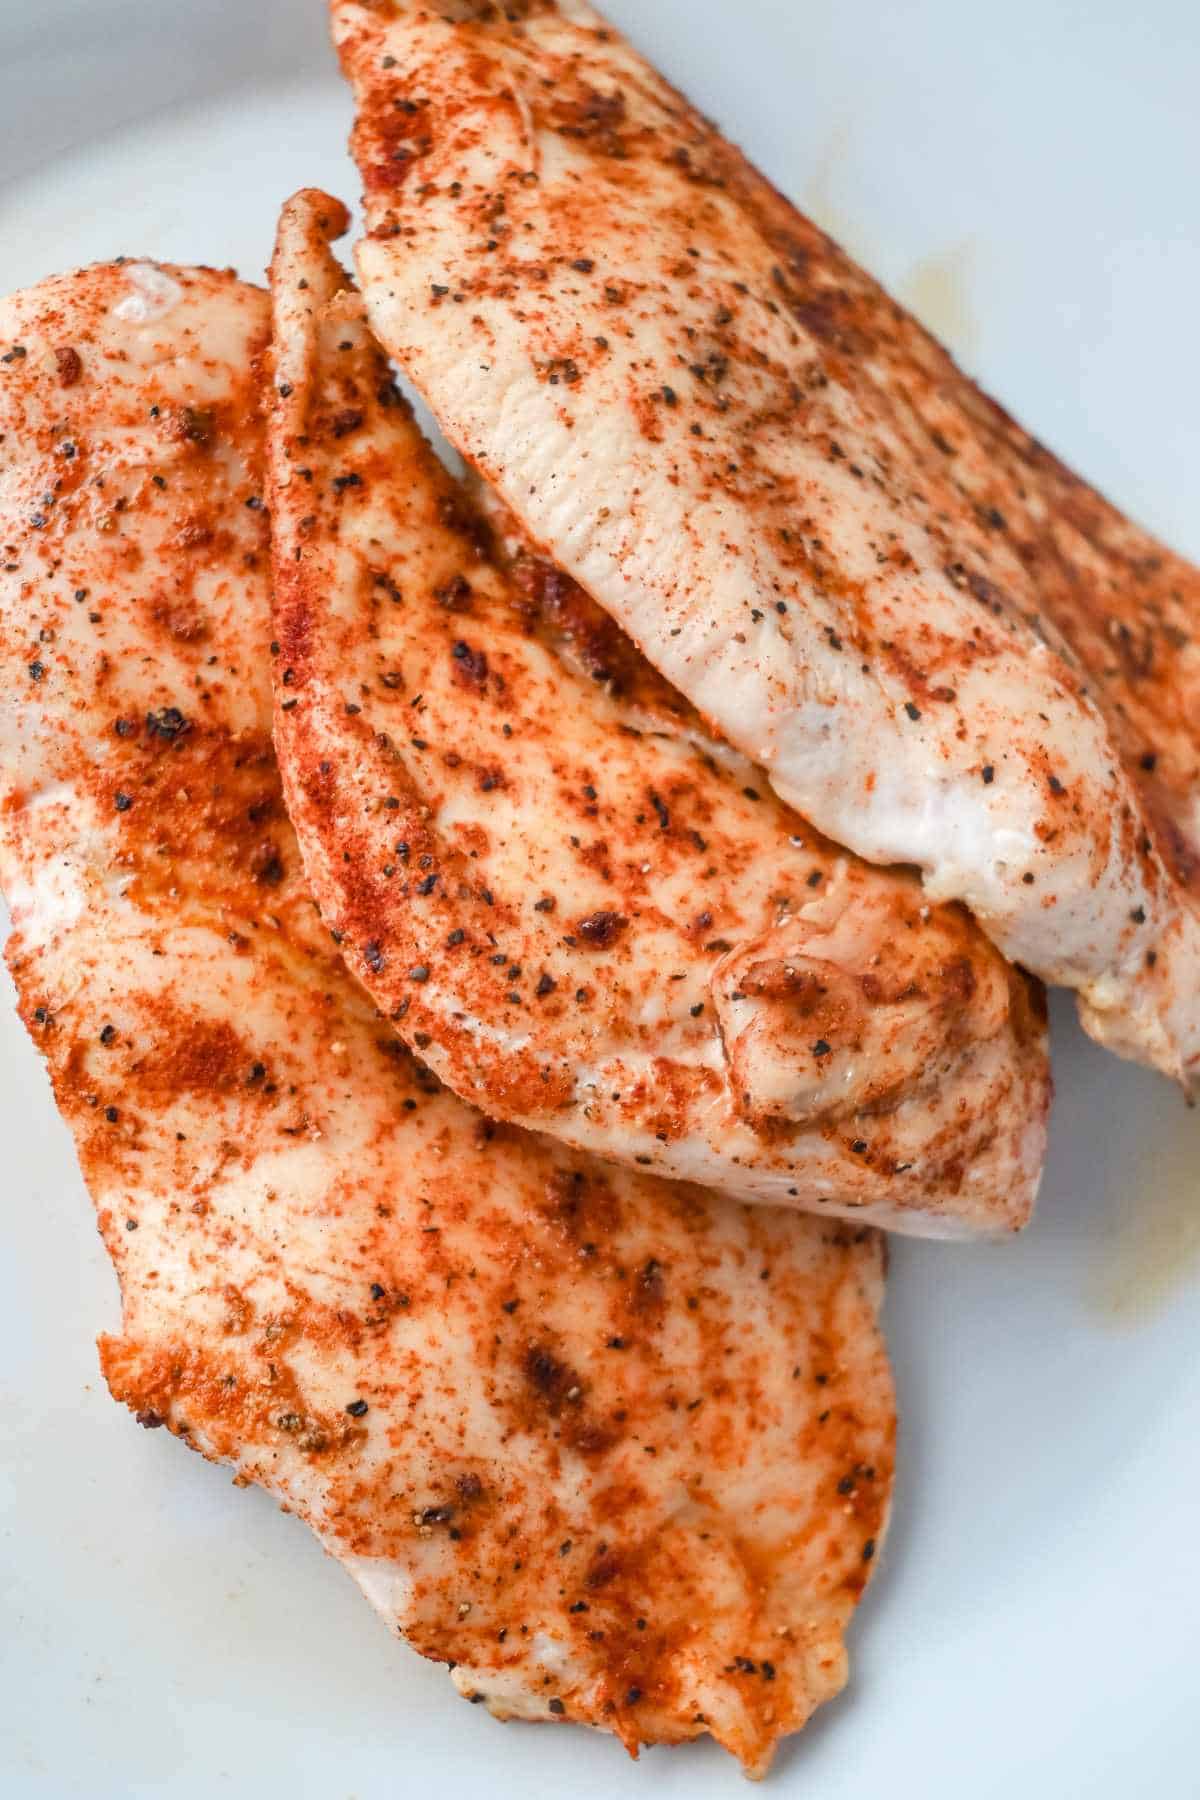 cooked and seasoned thinly sliced chicken breast on a white plate.